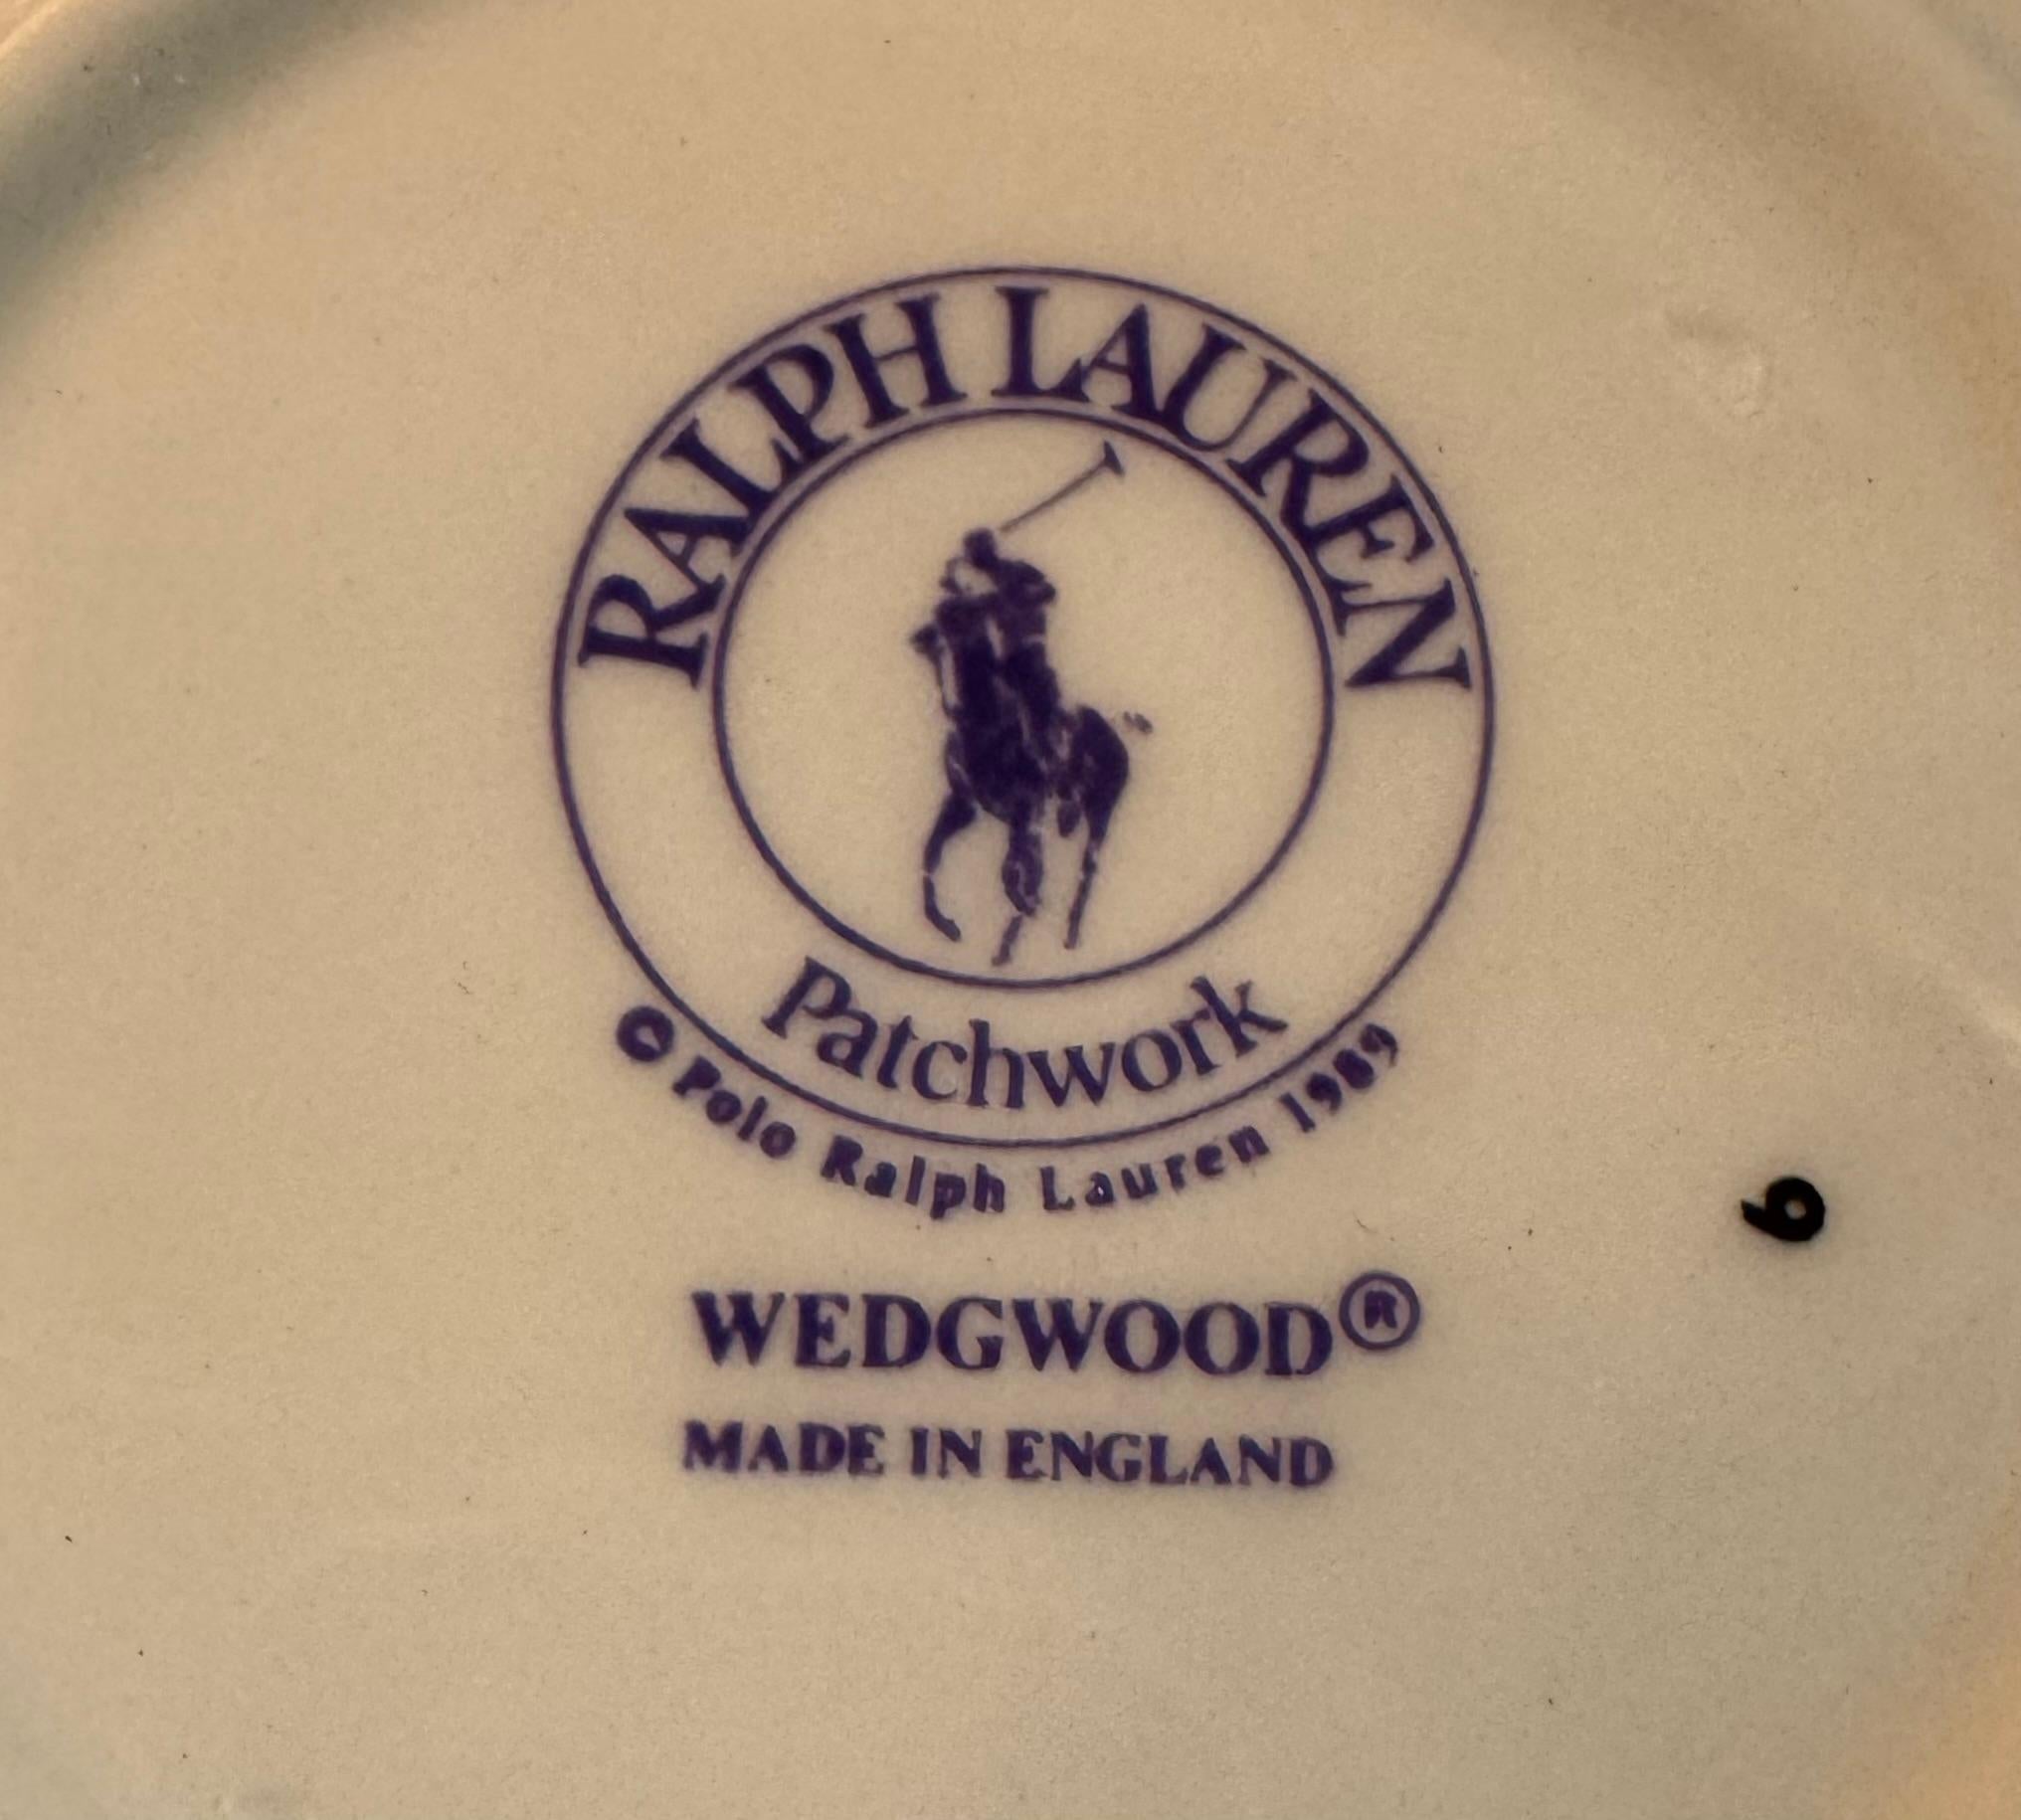 Ralph Lauren Wedgwood Patchwork Cup & Saucer set ~ 4 pieces In Good Condition For Sale In New York, NY